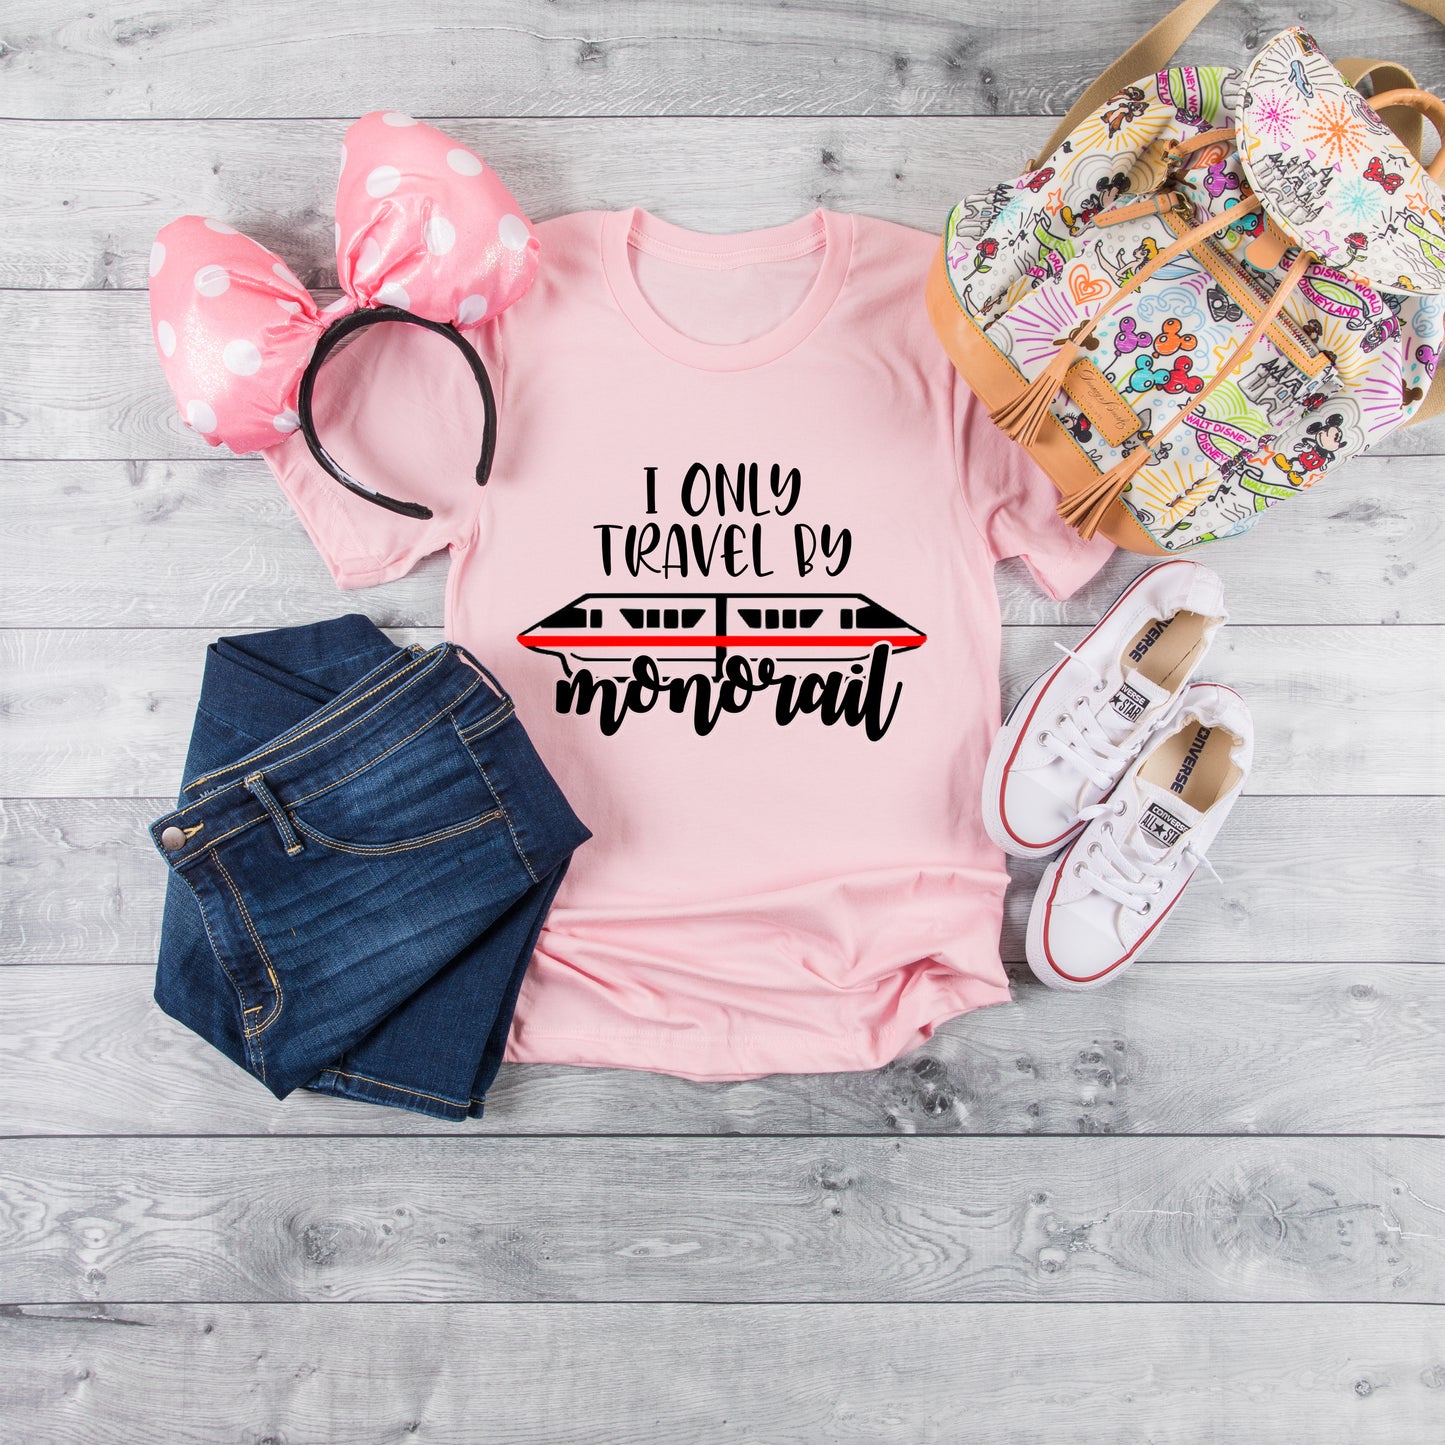 TRAVEL BY MONORAIL TEE